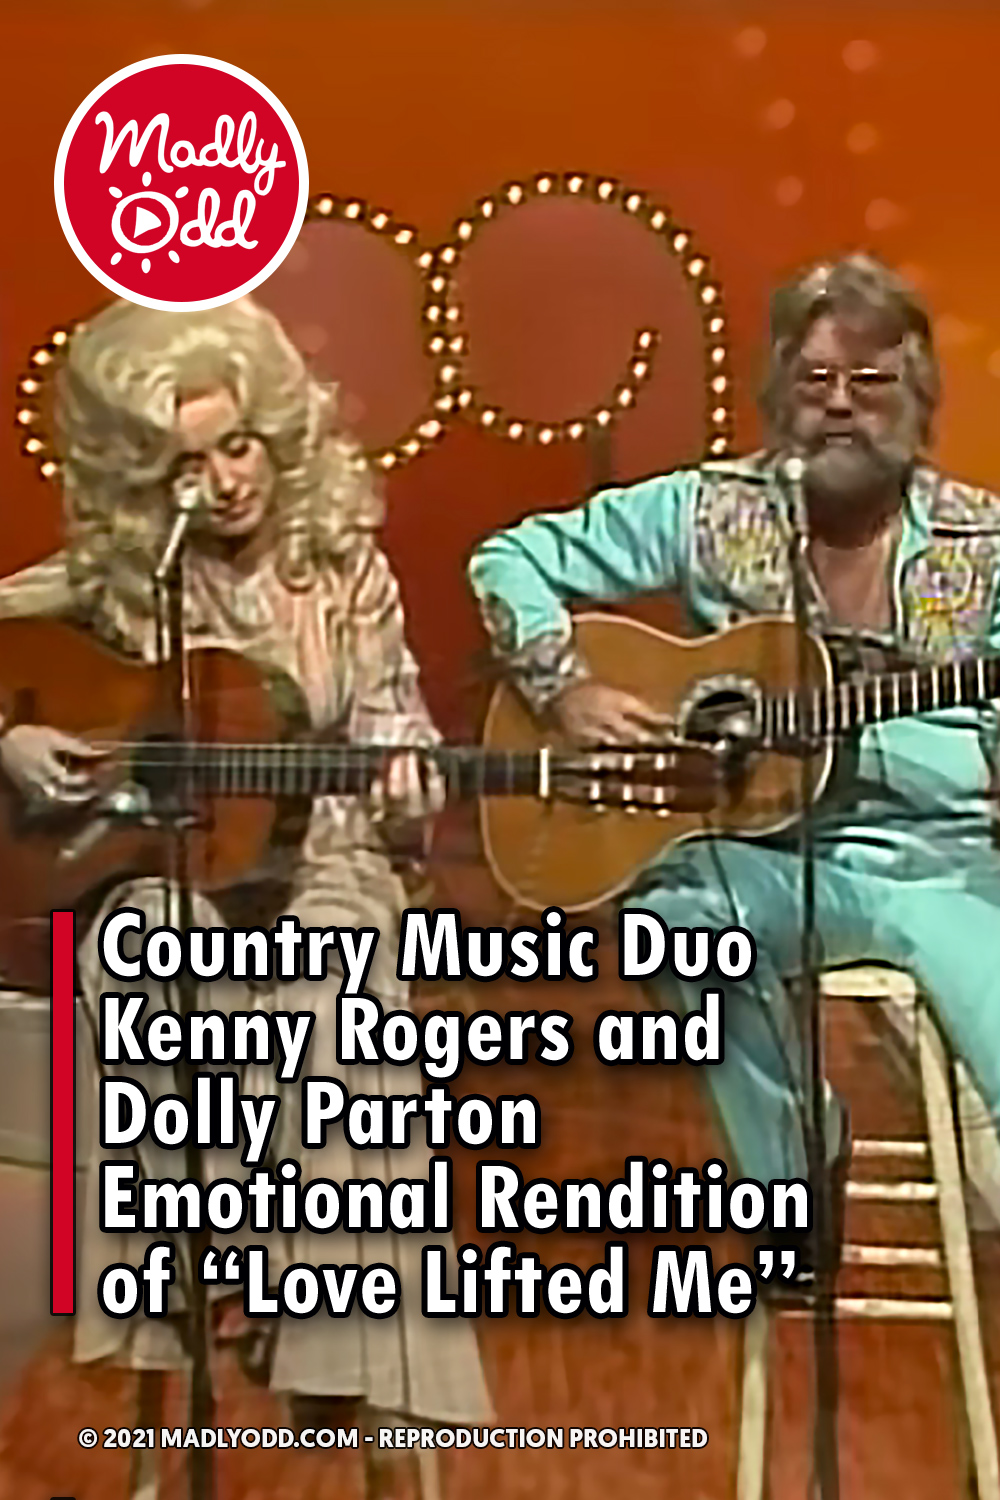 Country Music Duo Kenny Rogers and Dolly Parton Emotional Rendition of “Love Lifted Me”